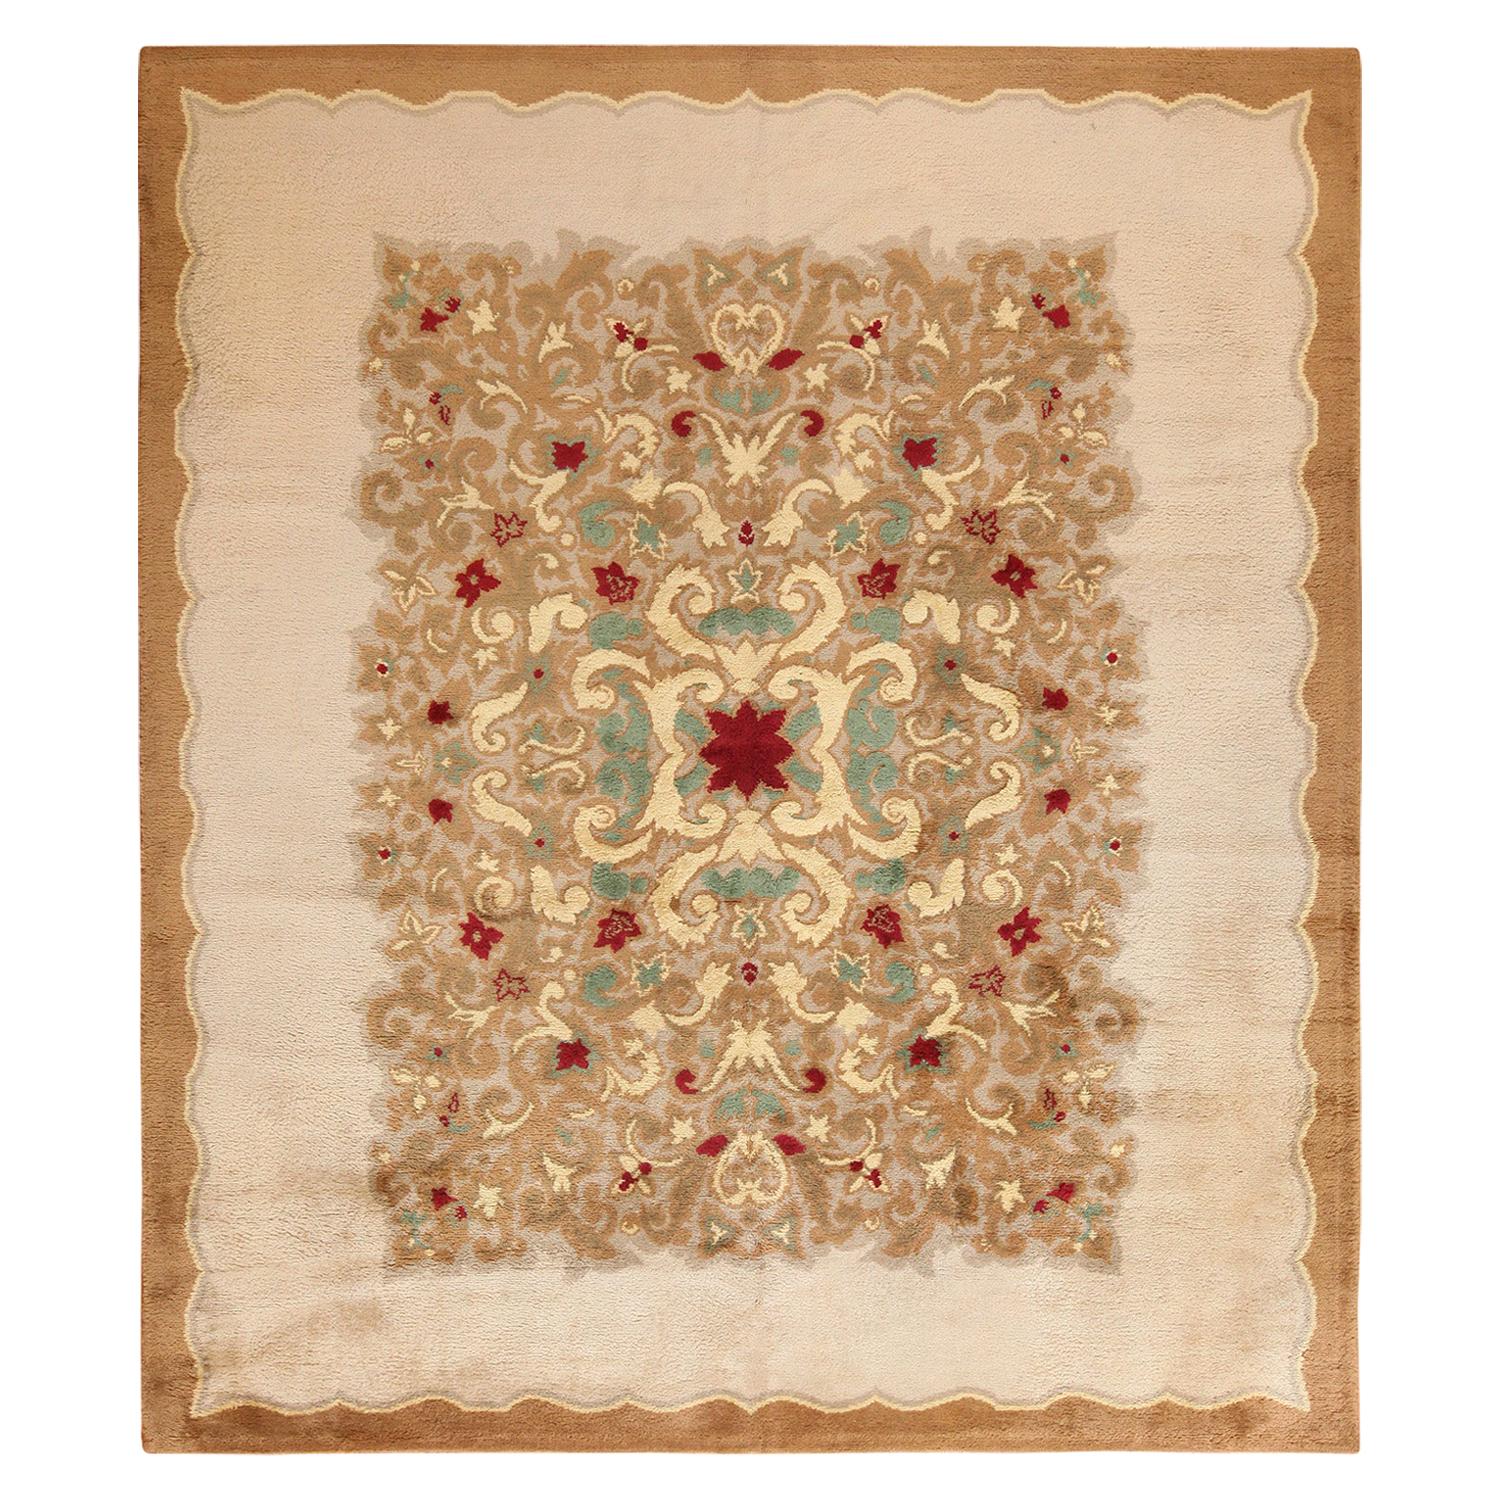 Nazmiyal Antique French Room Size Art Deco Rug. Size: 9 ft 10 in x 11 ft 7 in